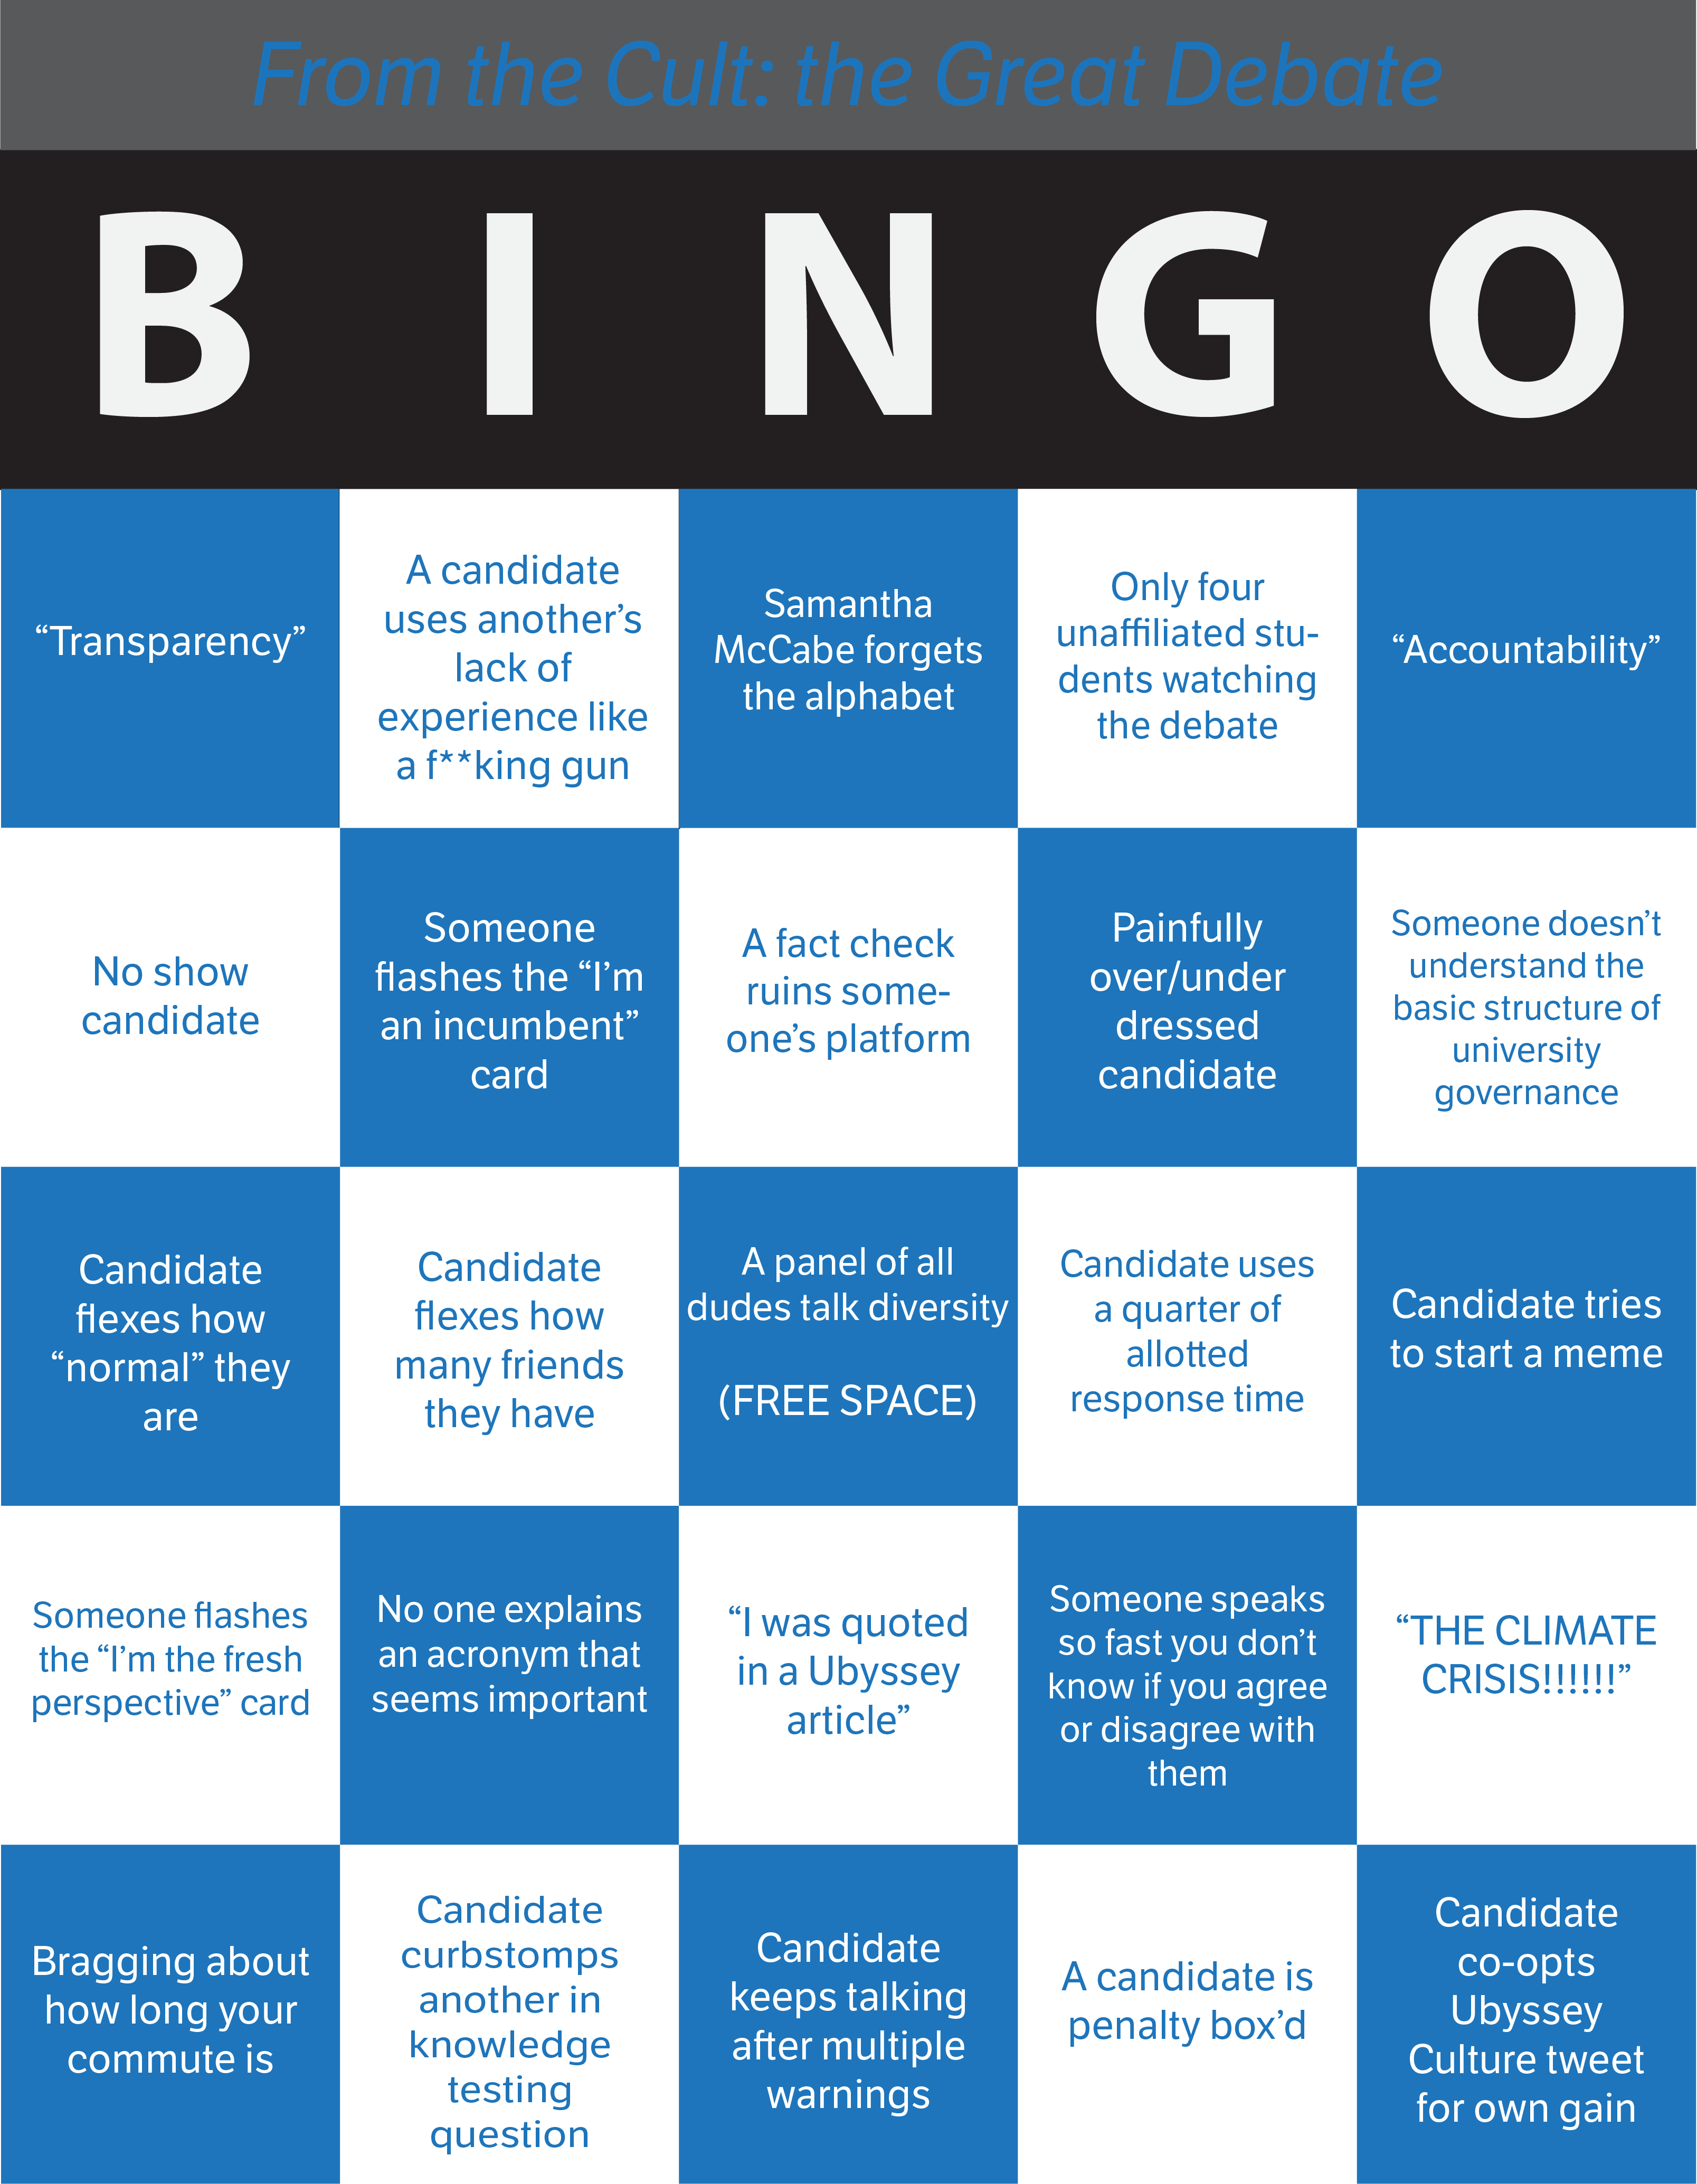 From The Cult: Your Great Debate bingo card